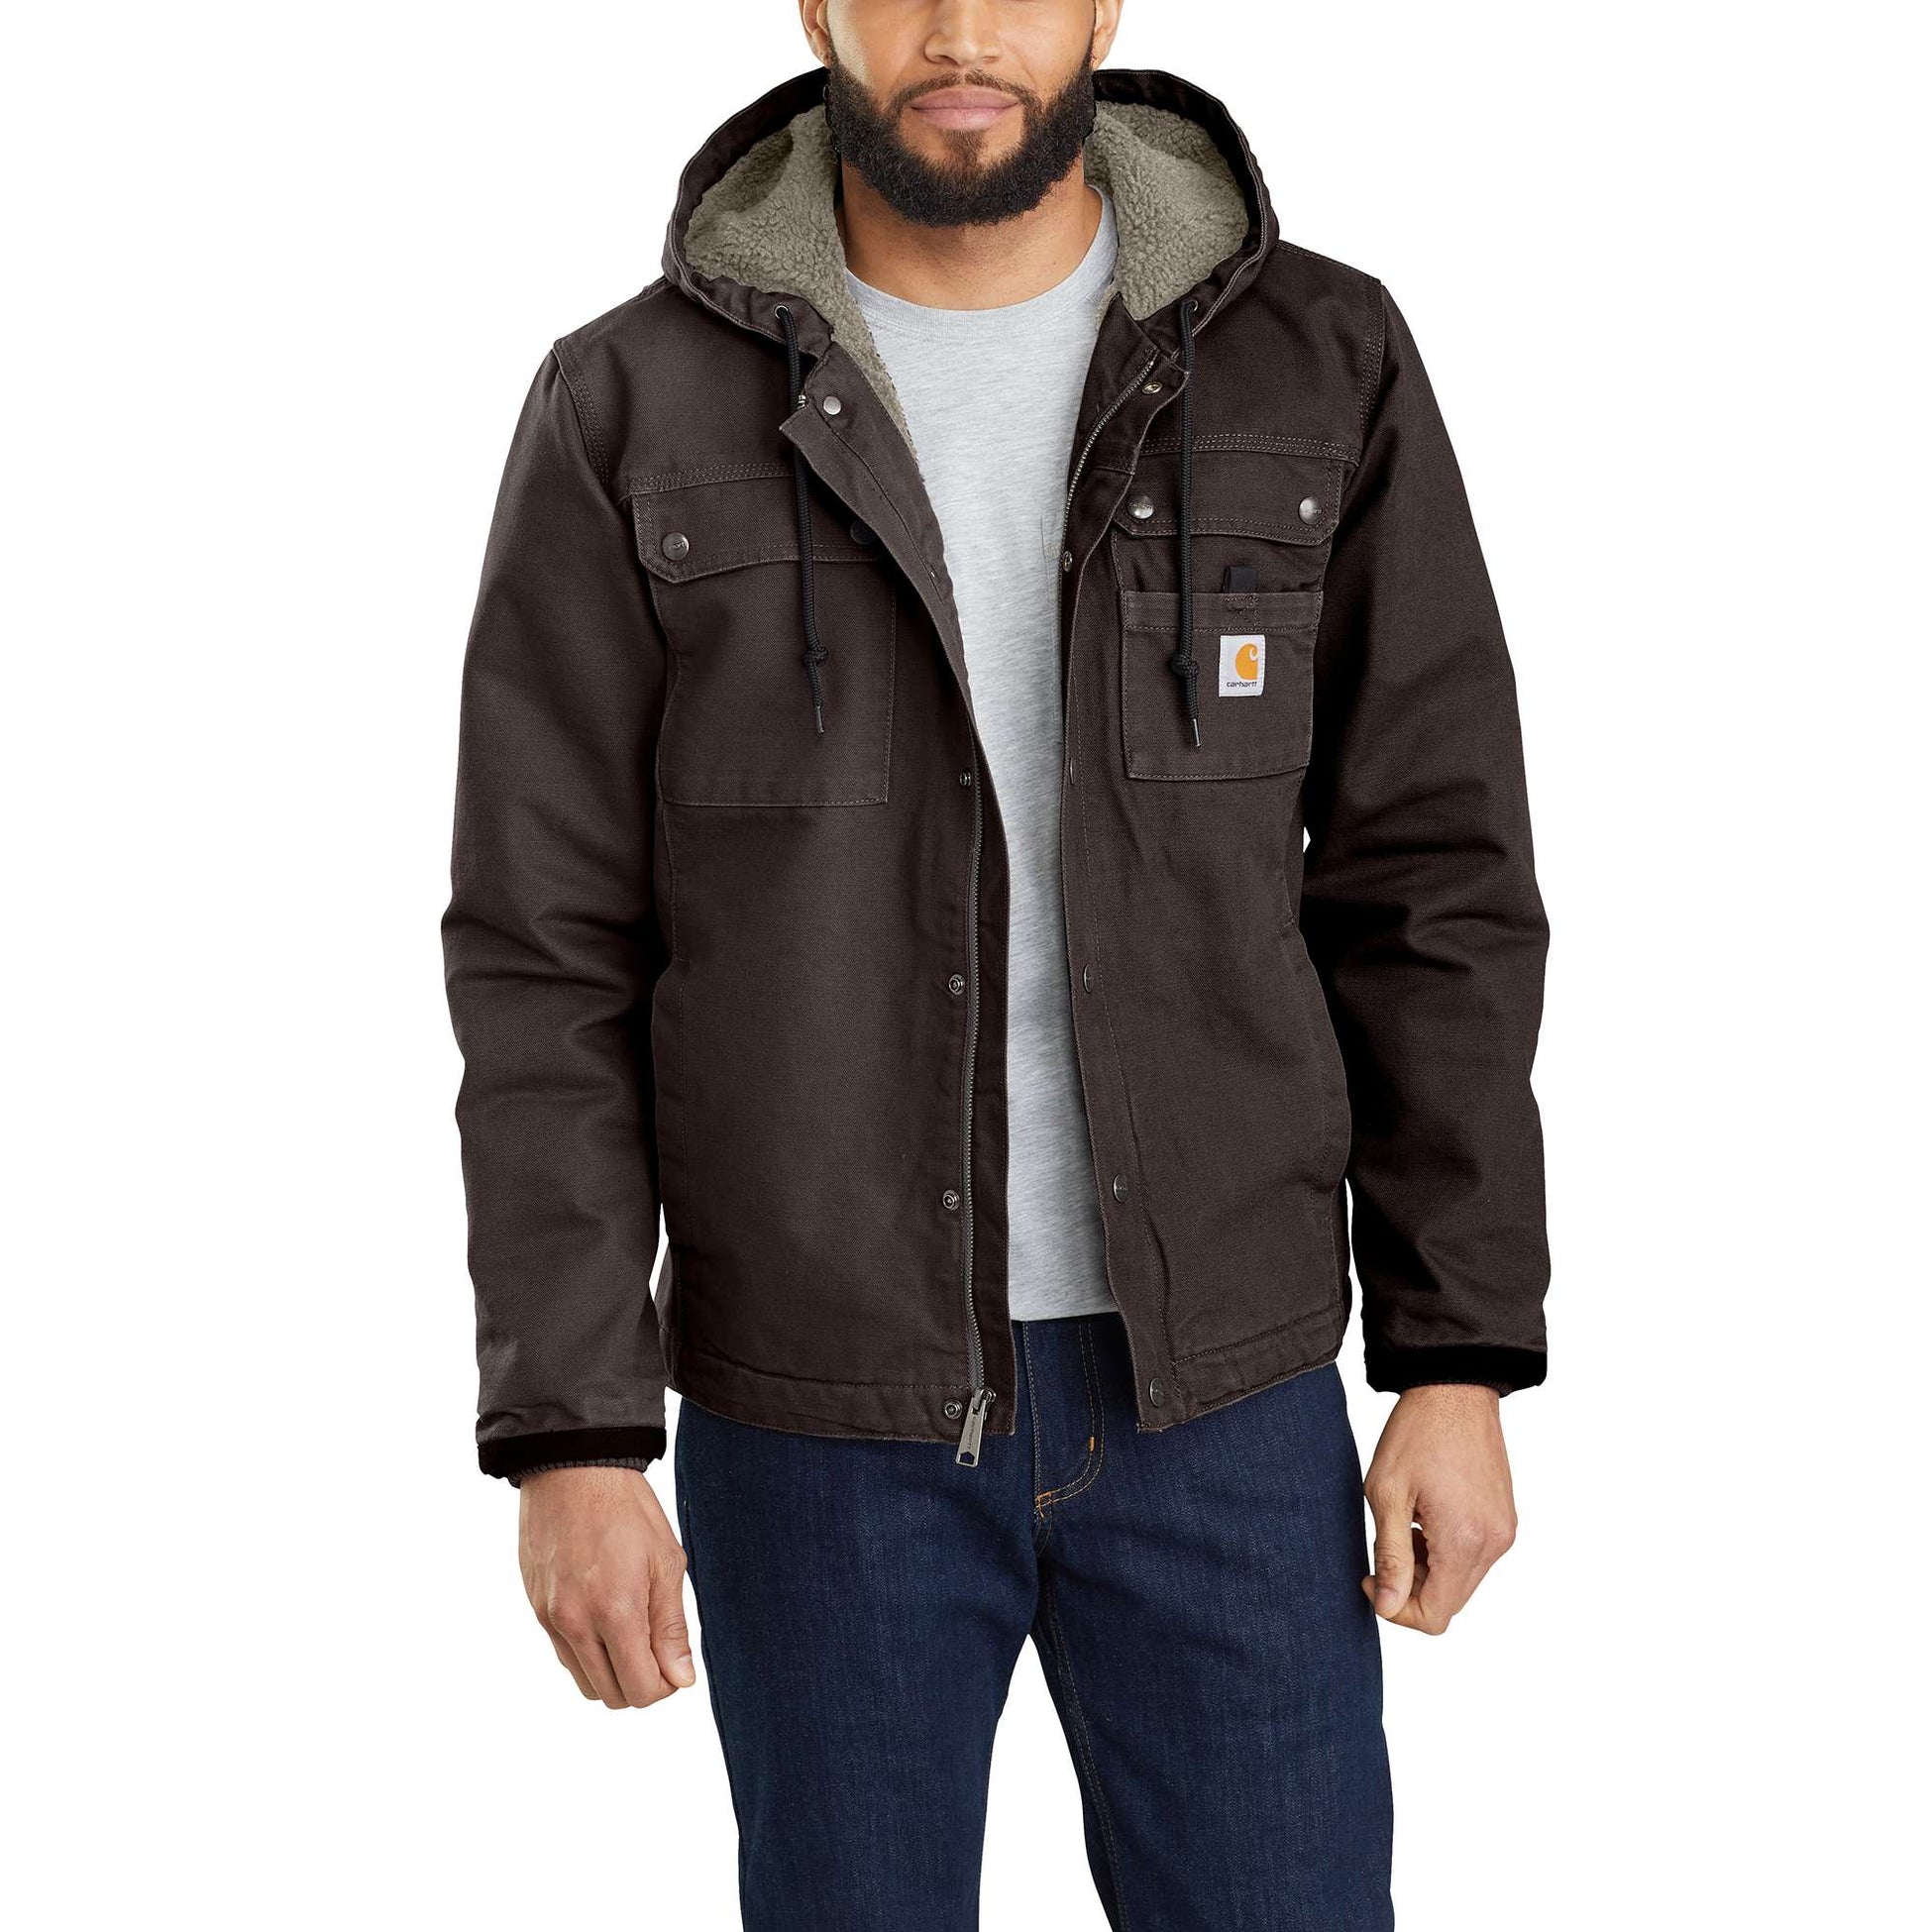 Relaxed Fit Washed Duck Sherpa-Lined Utility Jacket | Carhartt Reworked